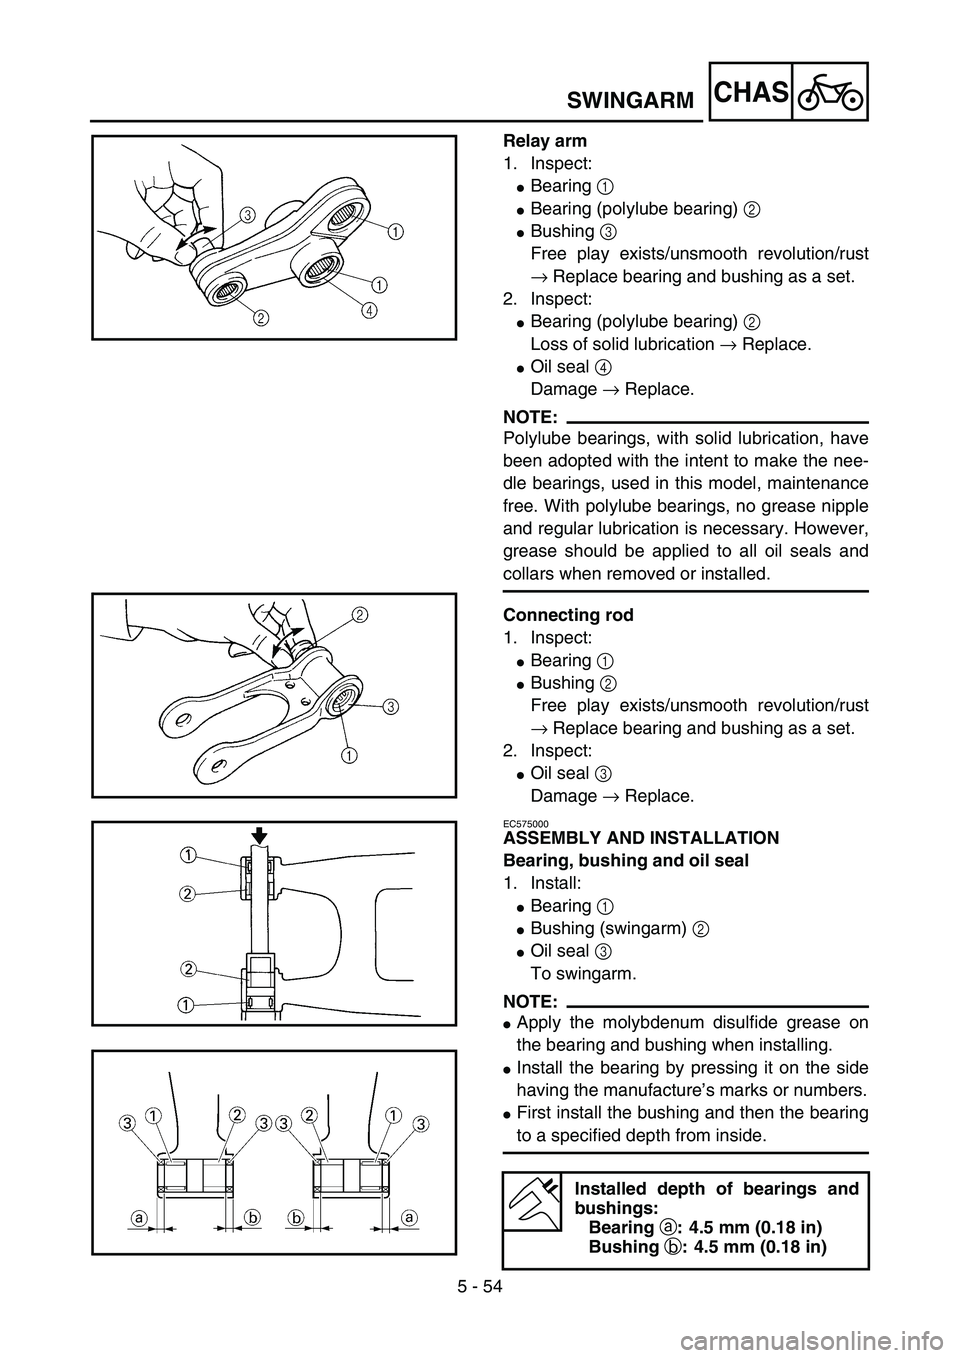 YAMAHA YZ85 2006  Owners Manual 5 - 54
CHAS
Relay arm
1. Inspect:
Bearing 1 
Bearing (polylube bearing) 2
Bushing 3 
Free play exists/unsmooth revolution/rust
→ Replace bearing and bushing as a set.
2. Inspect:
Bearing (polylu